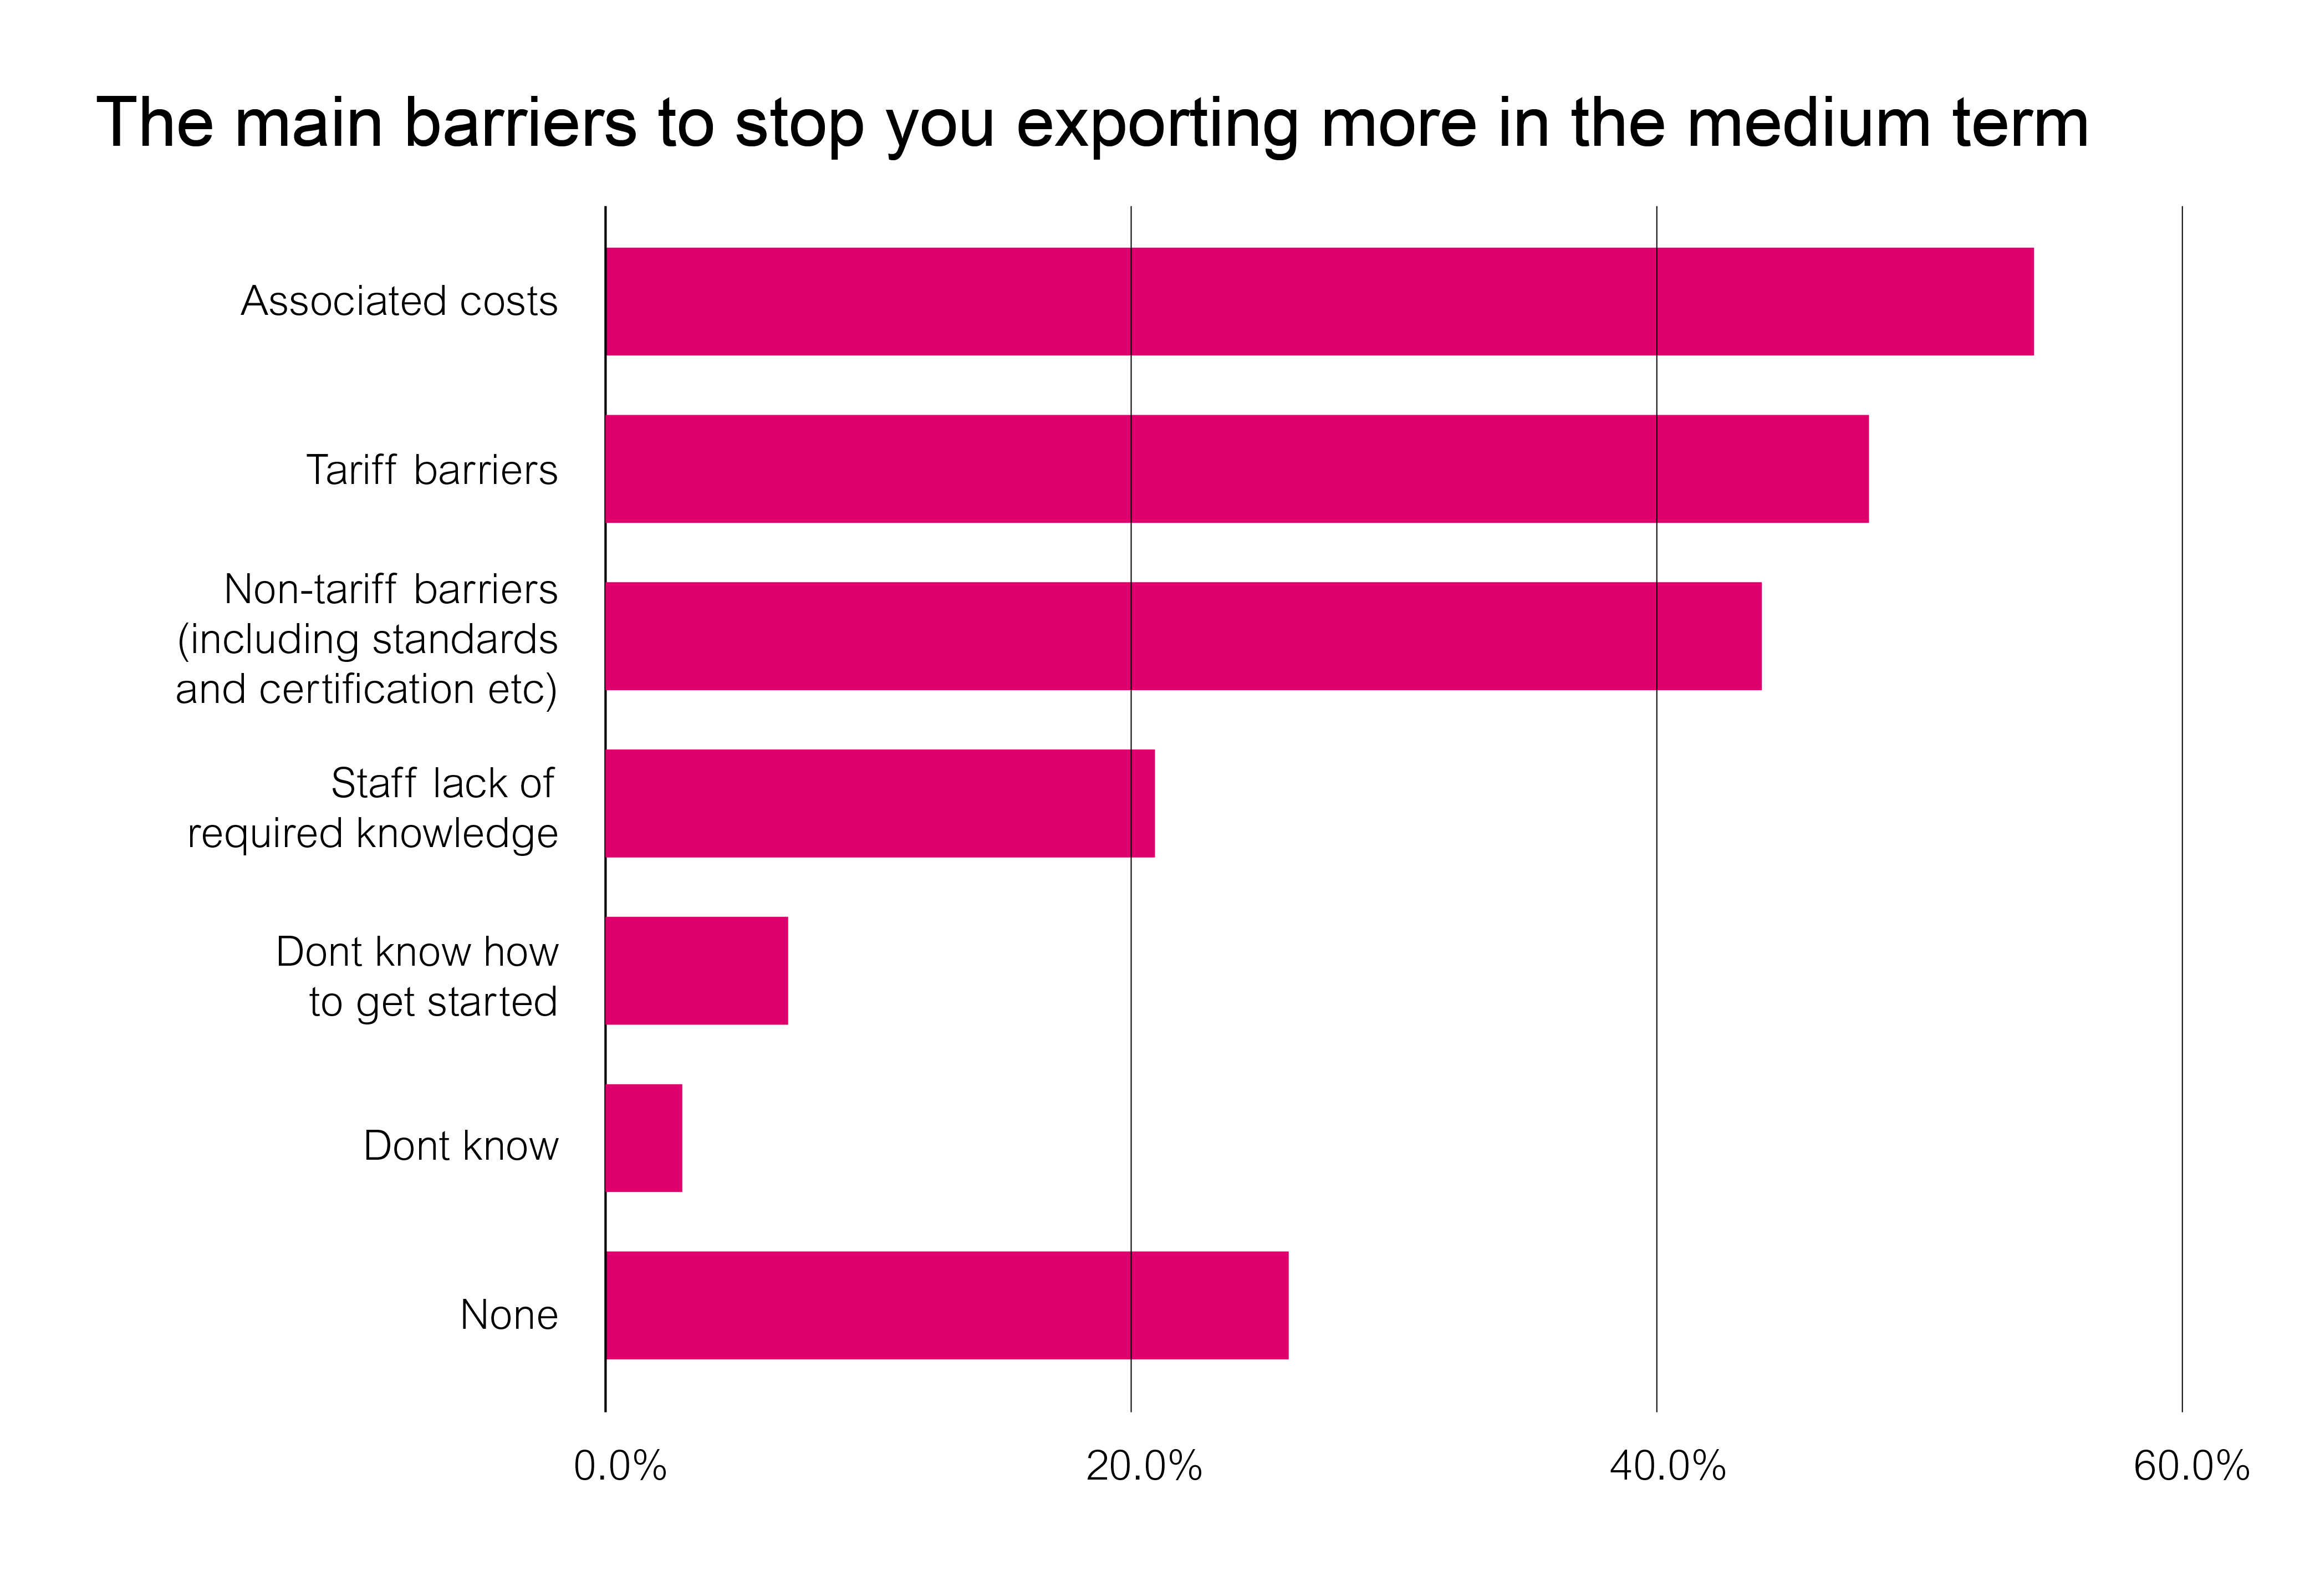 The main barriers to stop you exporting more in the medium term